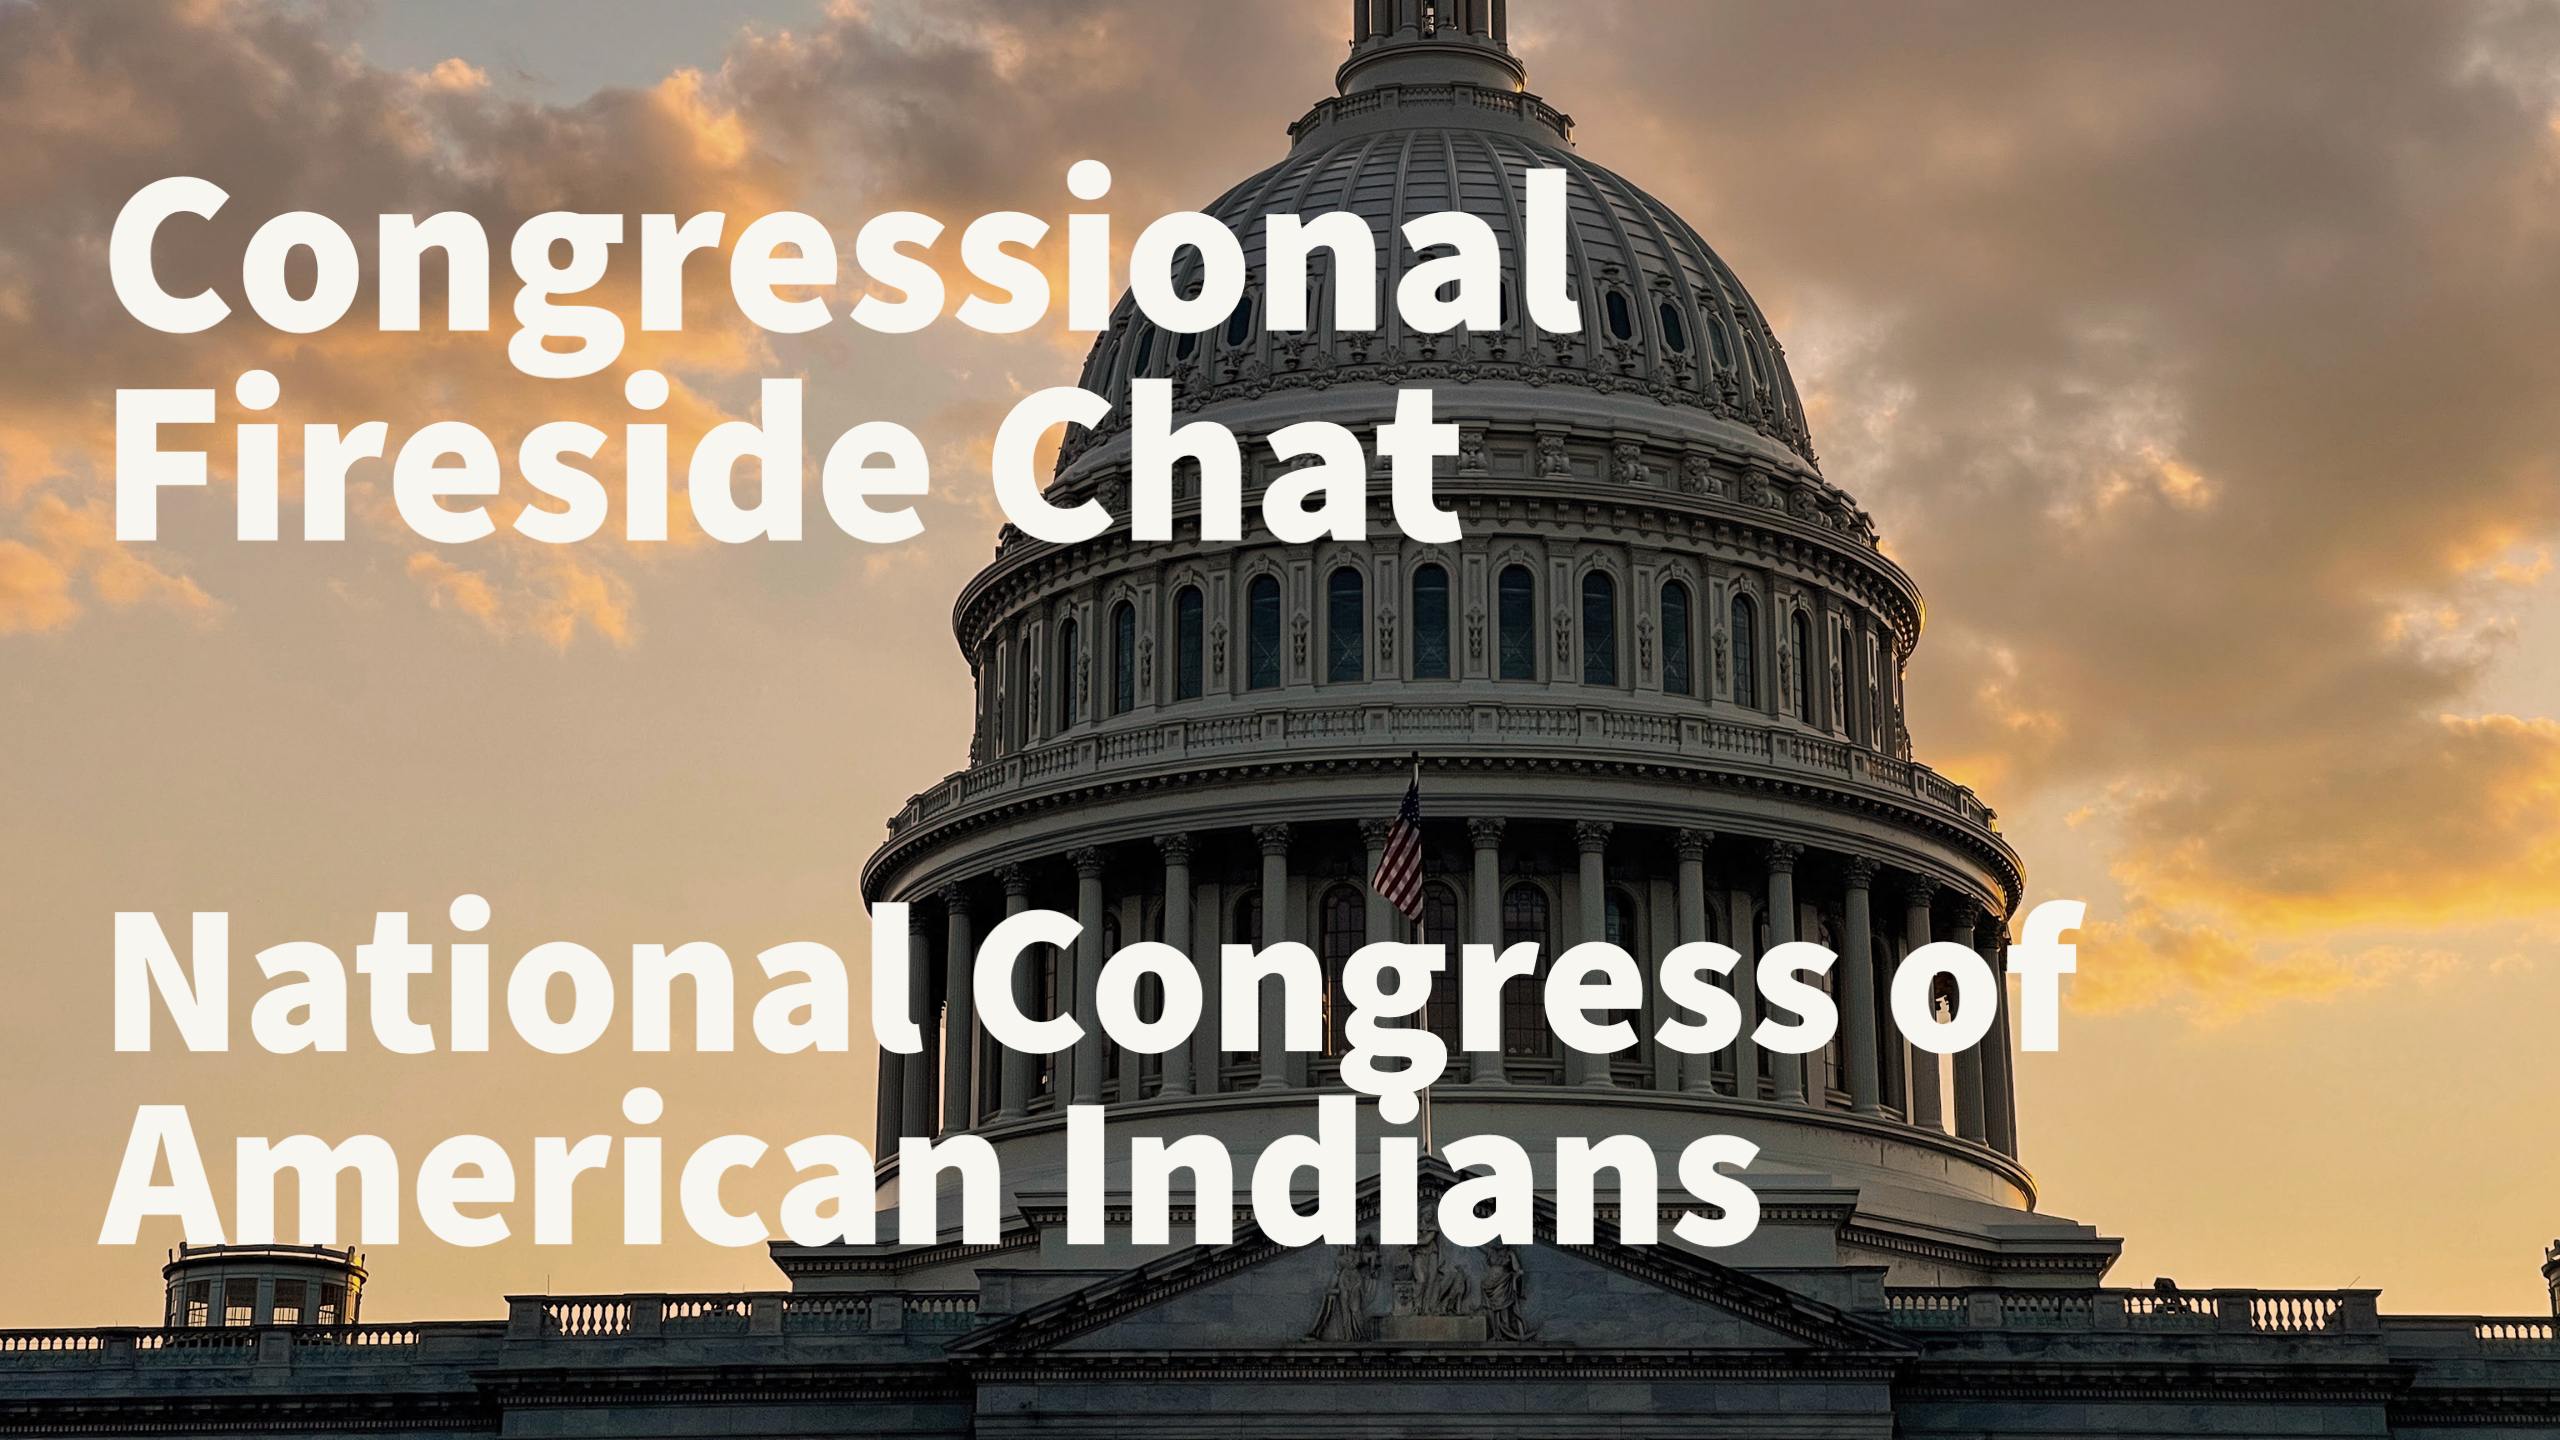 Congressional Fireside Chat